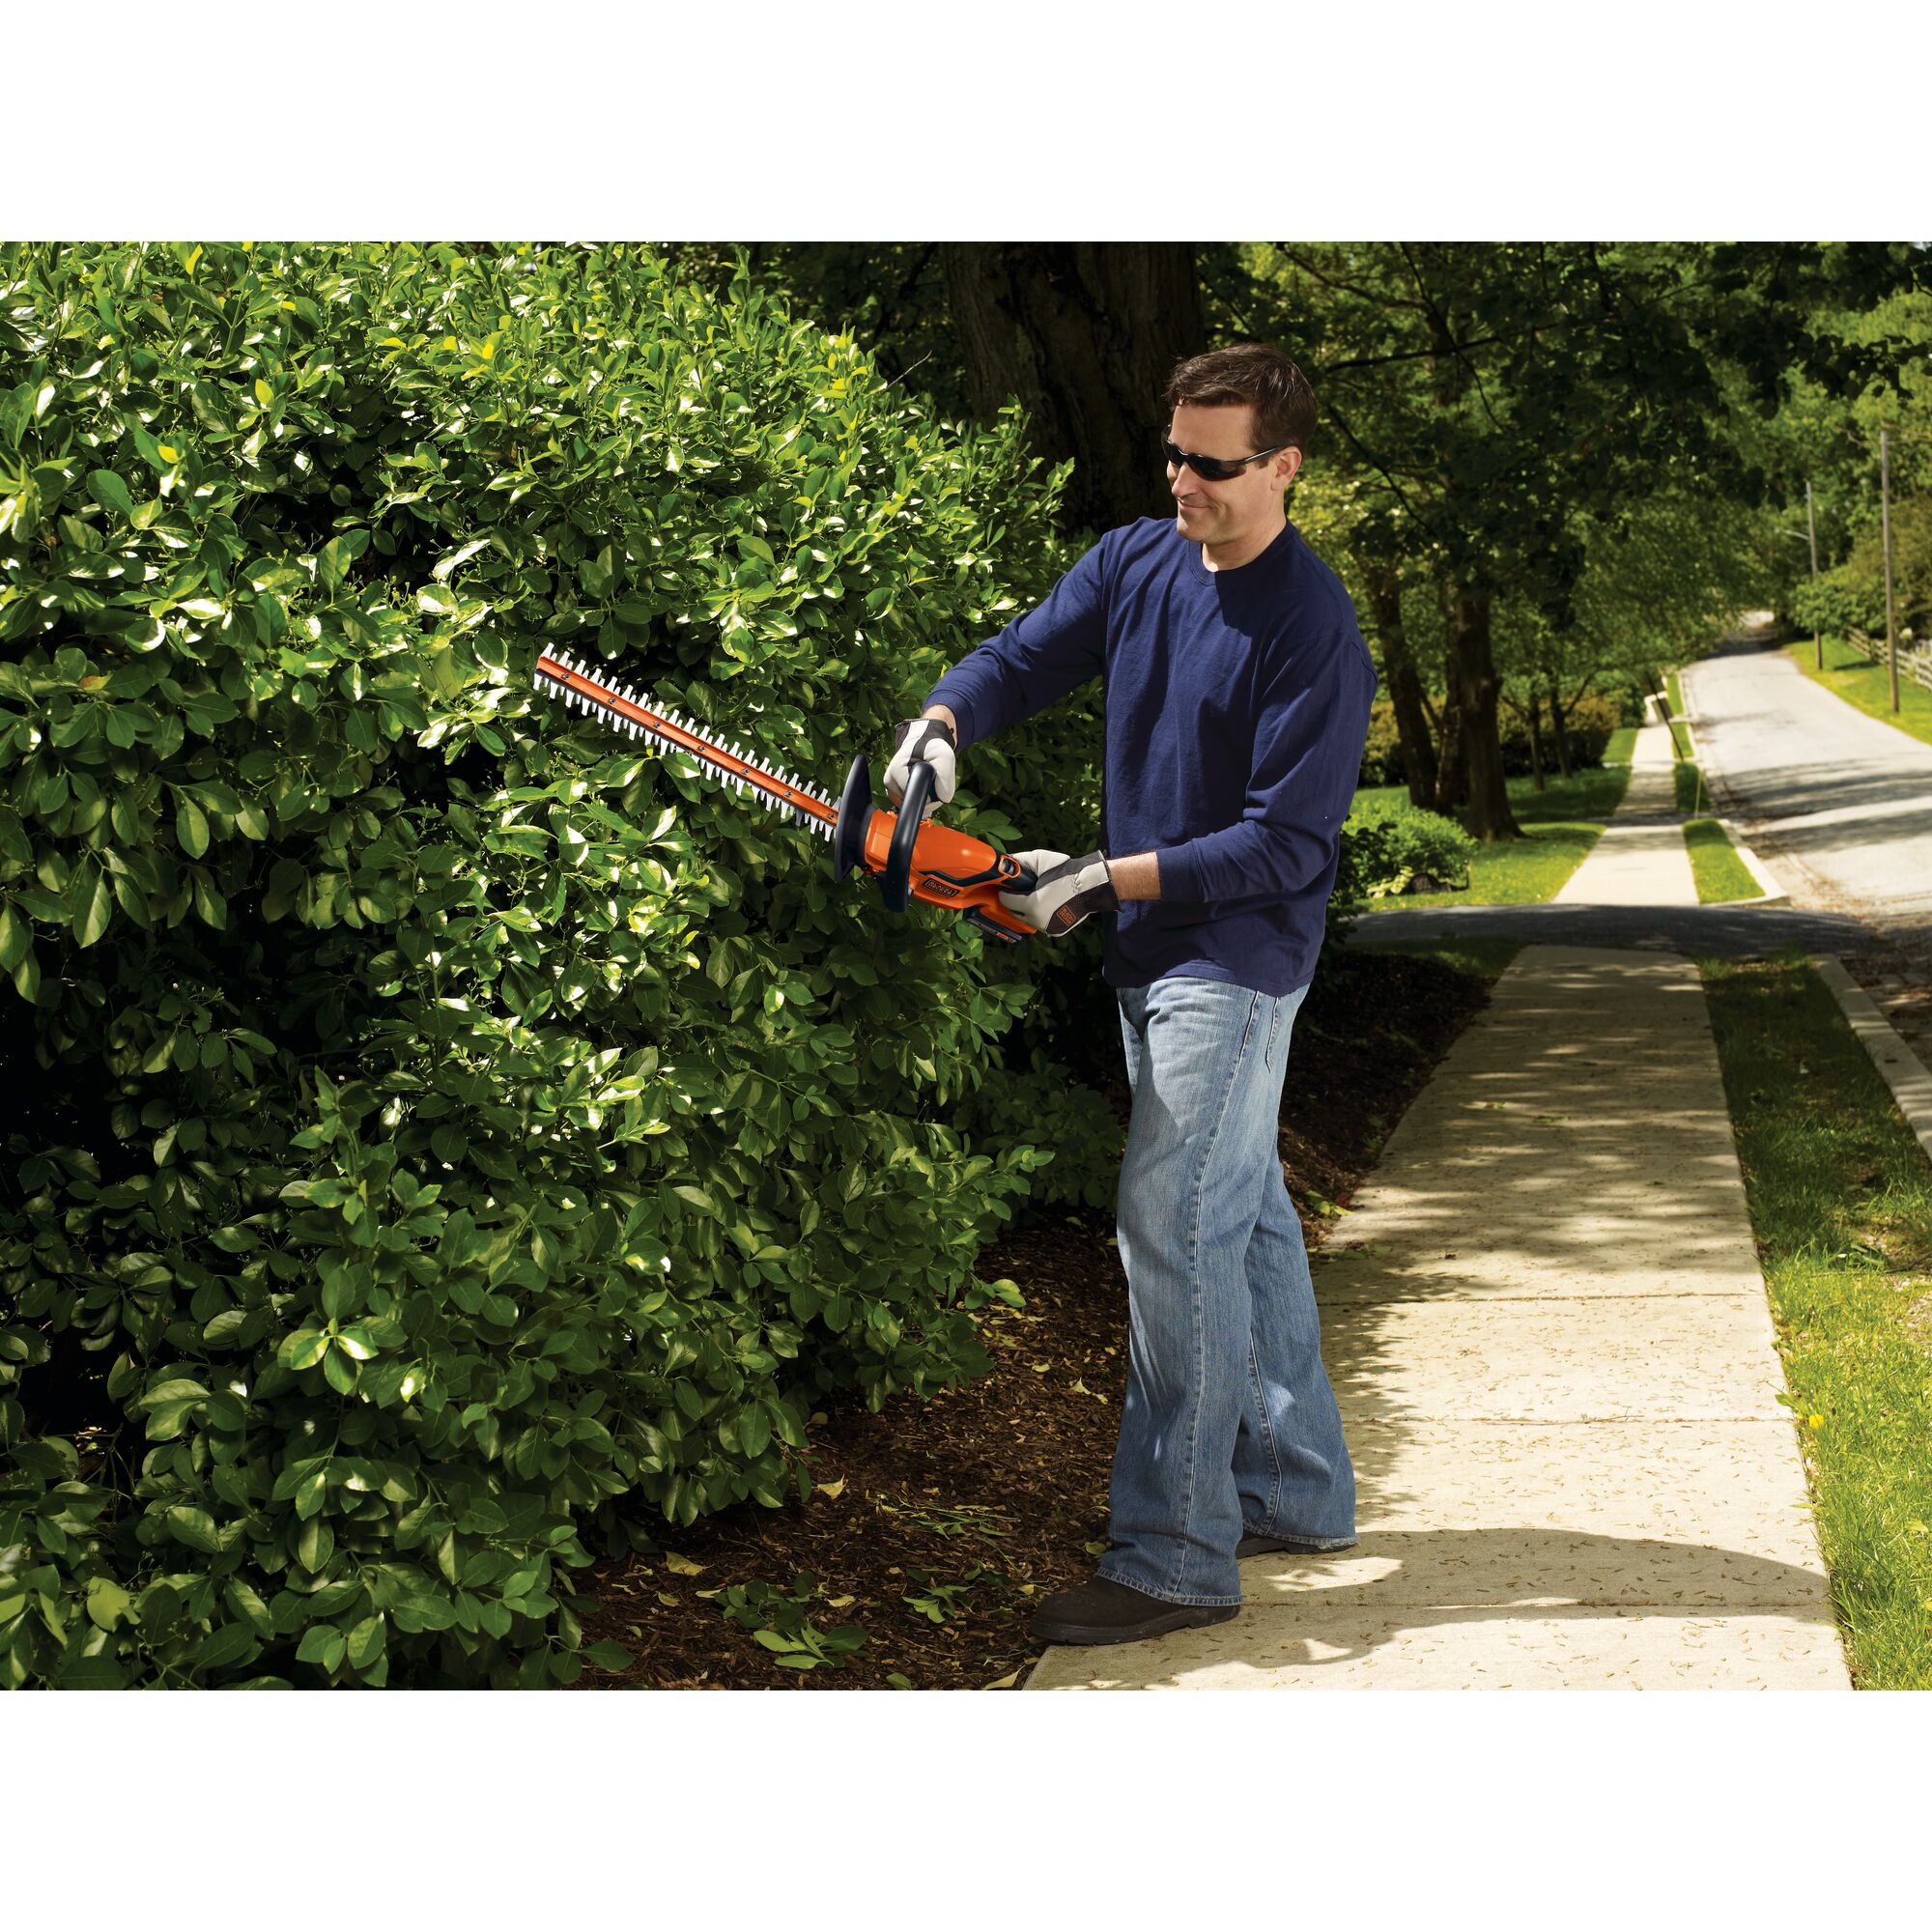 20 Volt 22 inch Hedge Trimmer being used by a person on a bush.